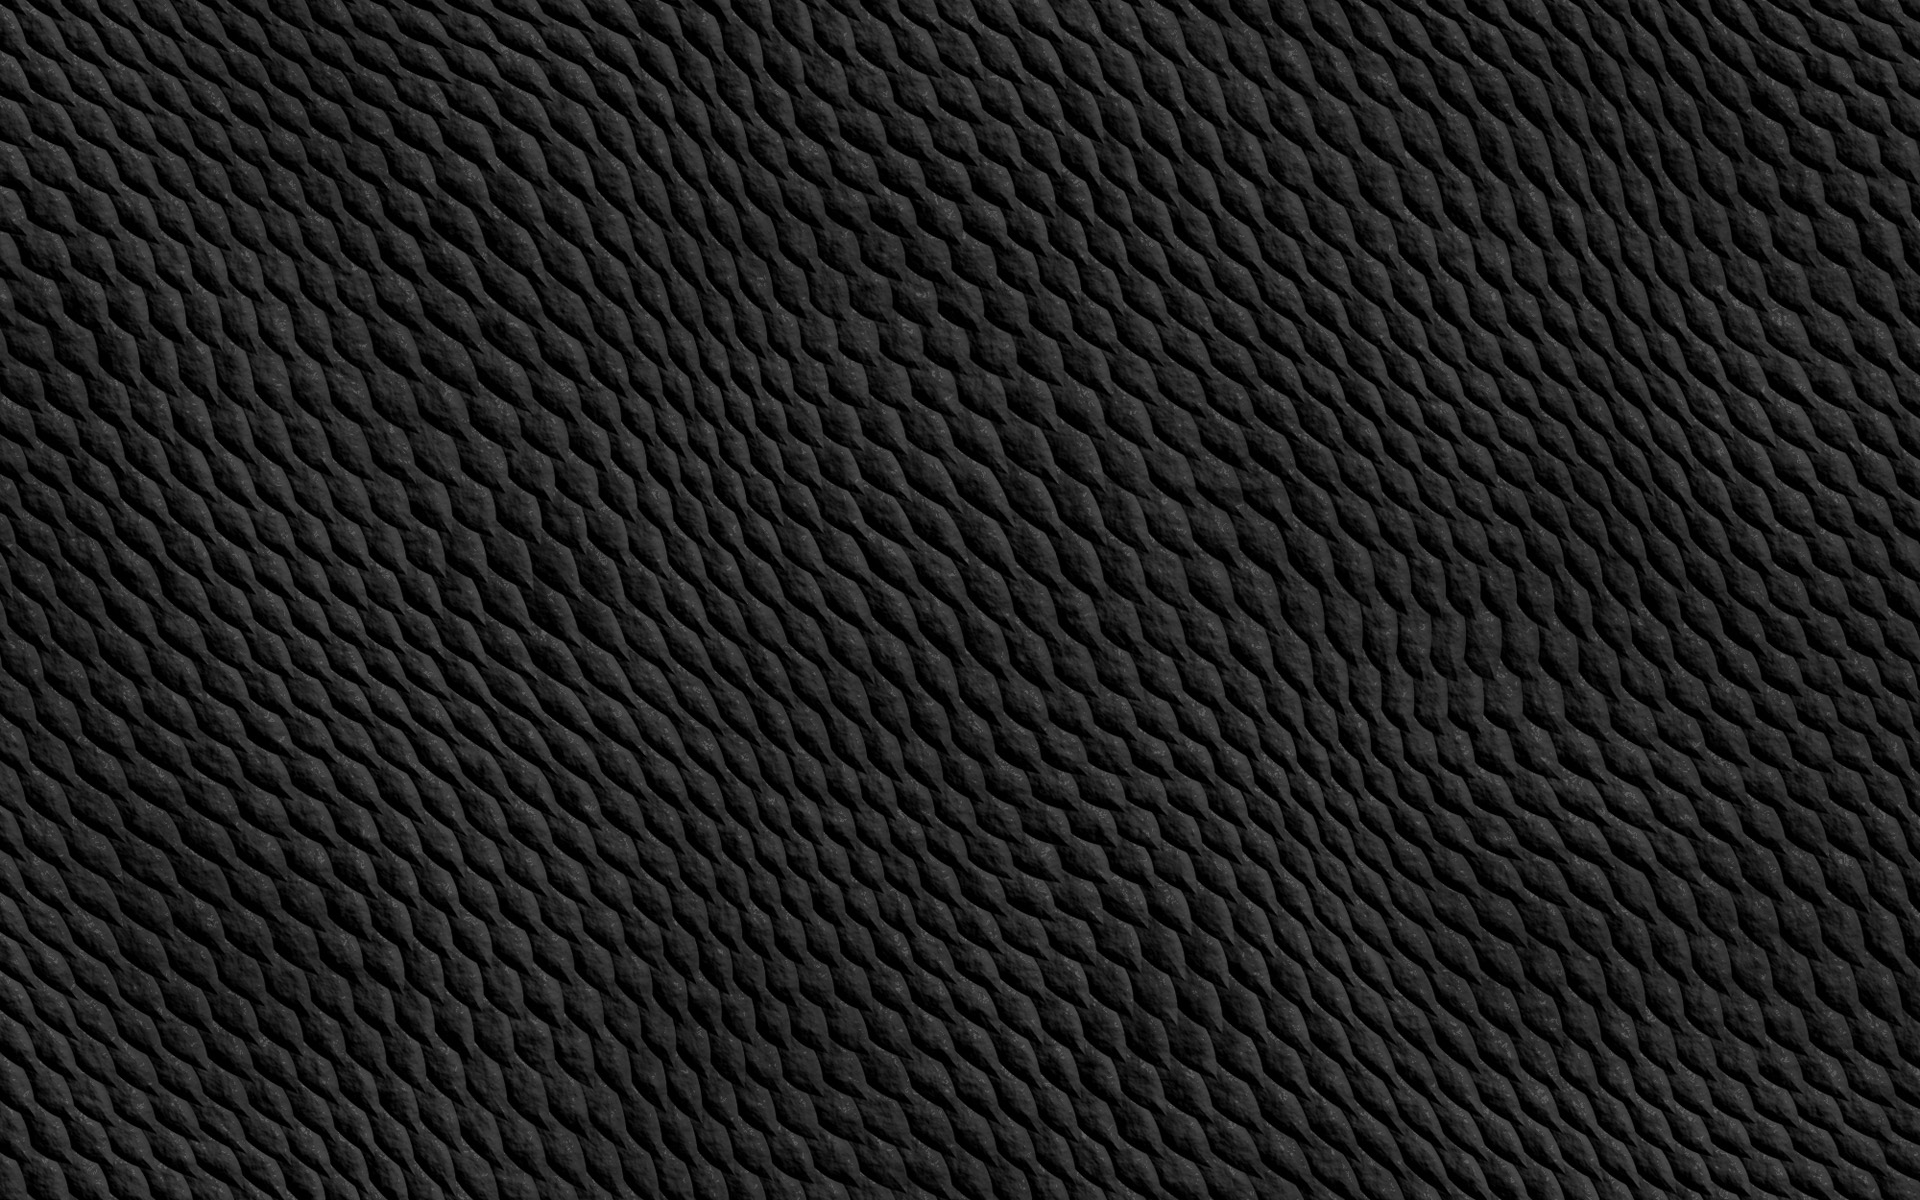 Download Wallpaper Black Snake Skin, Close Up, Reptile Skin, Snake Skin Textures, Black Snake, Macro, Leather Background, Snake Skin For Desktop With Resolution 1920x1200. High Quality HD Picture Wallpaper